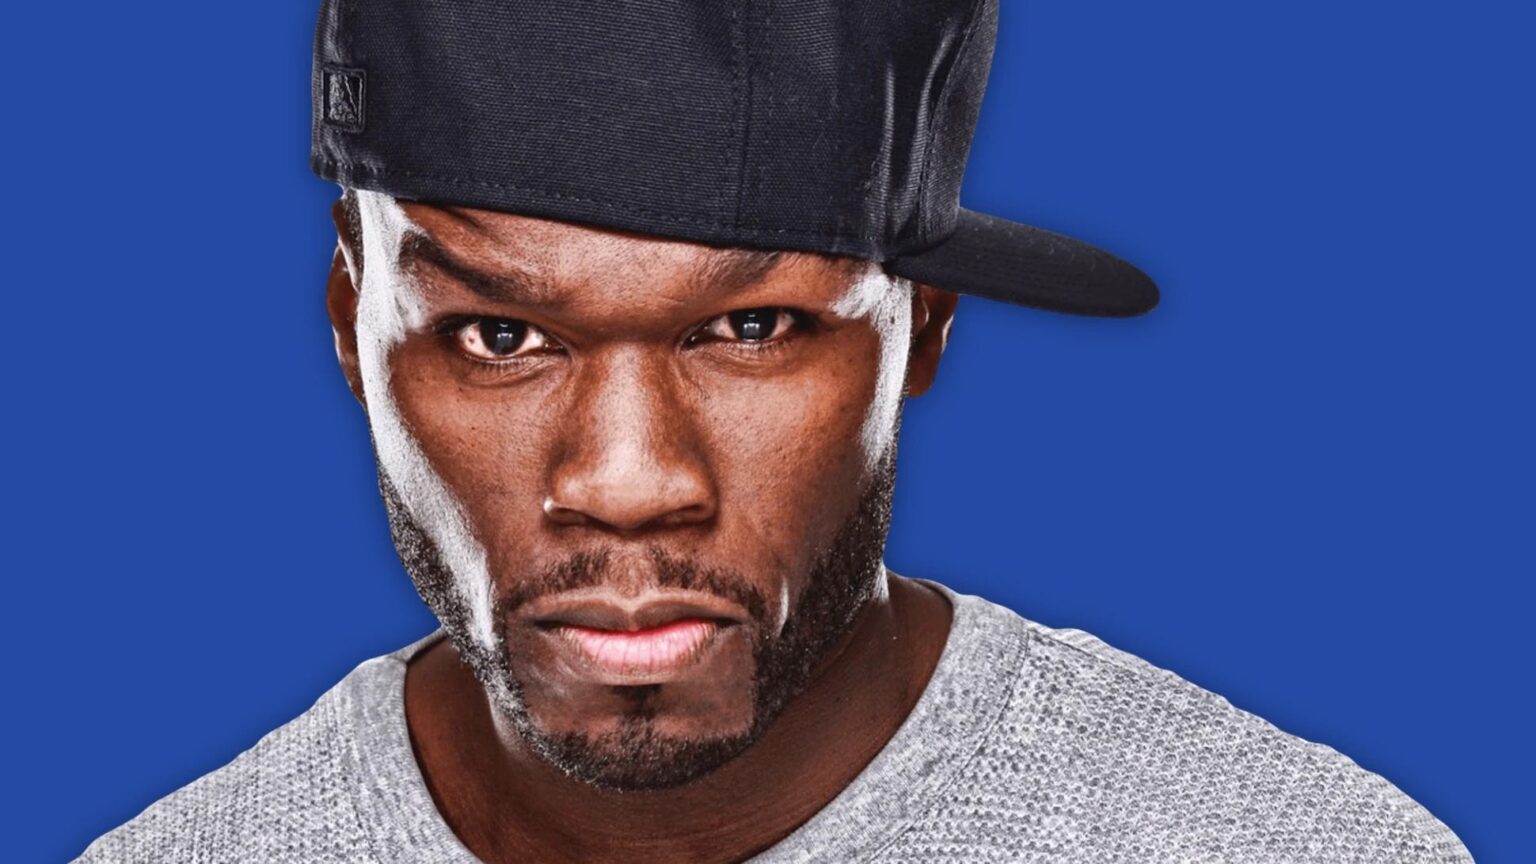 Will 50 Cent's new tour make him even richer? Get the latest updates on the rapper's net worth and find out how he's continuing to thrive in the industry.